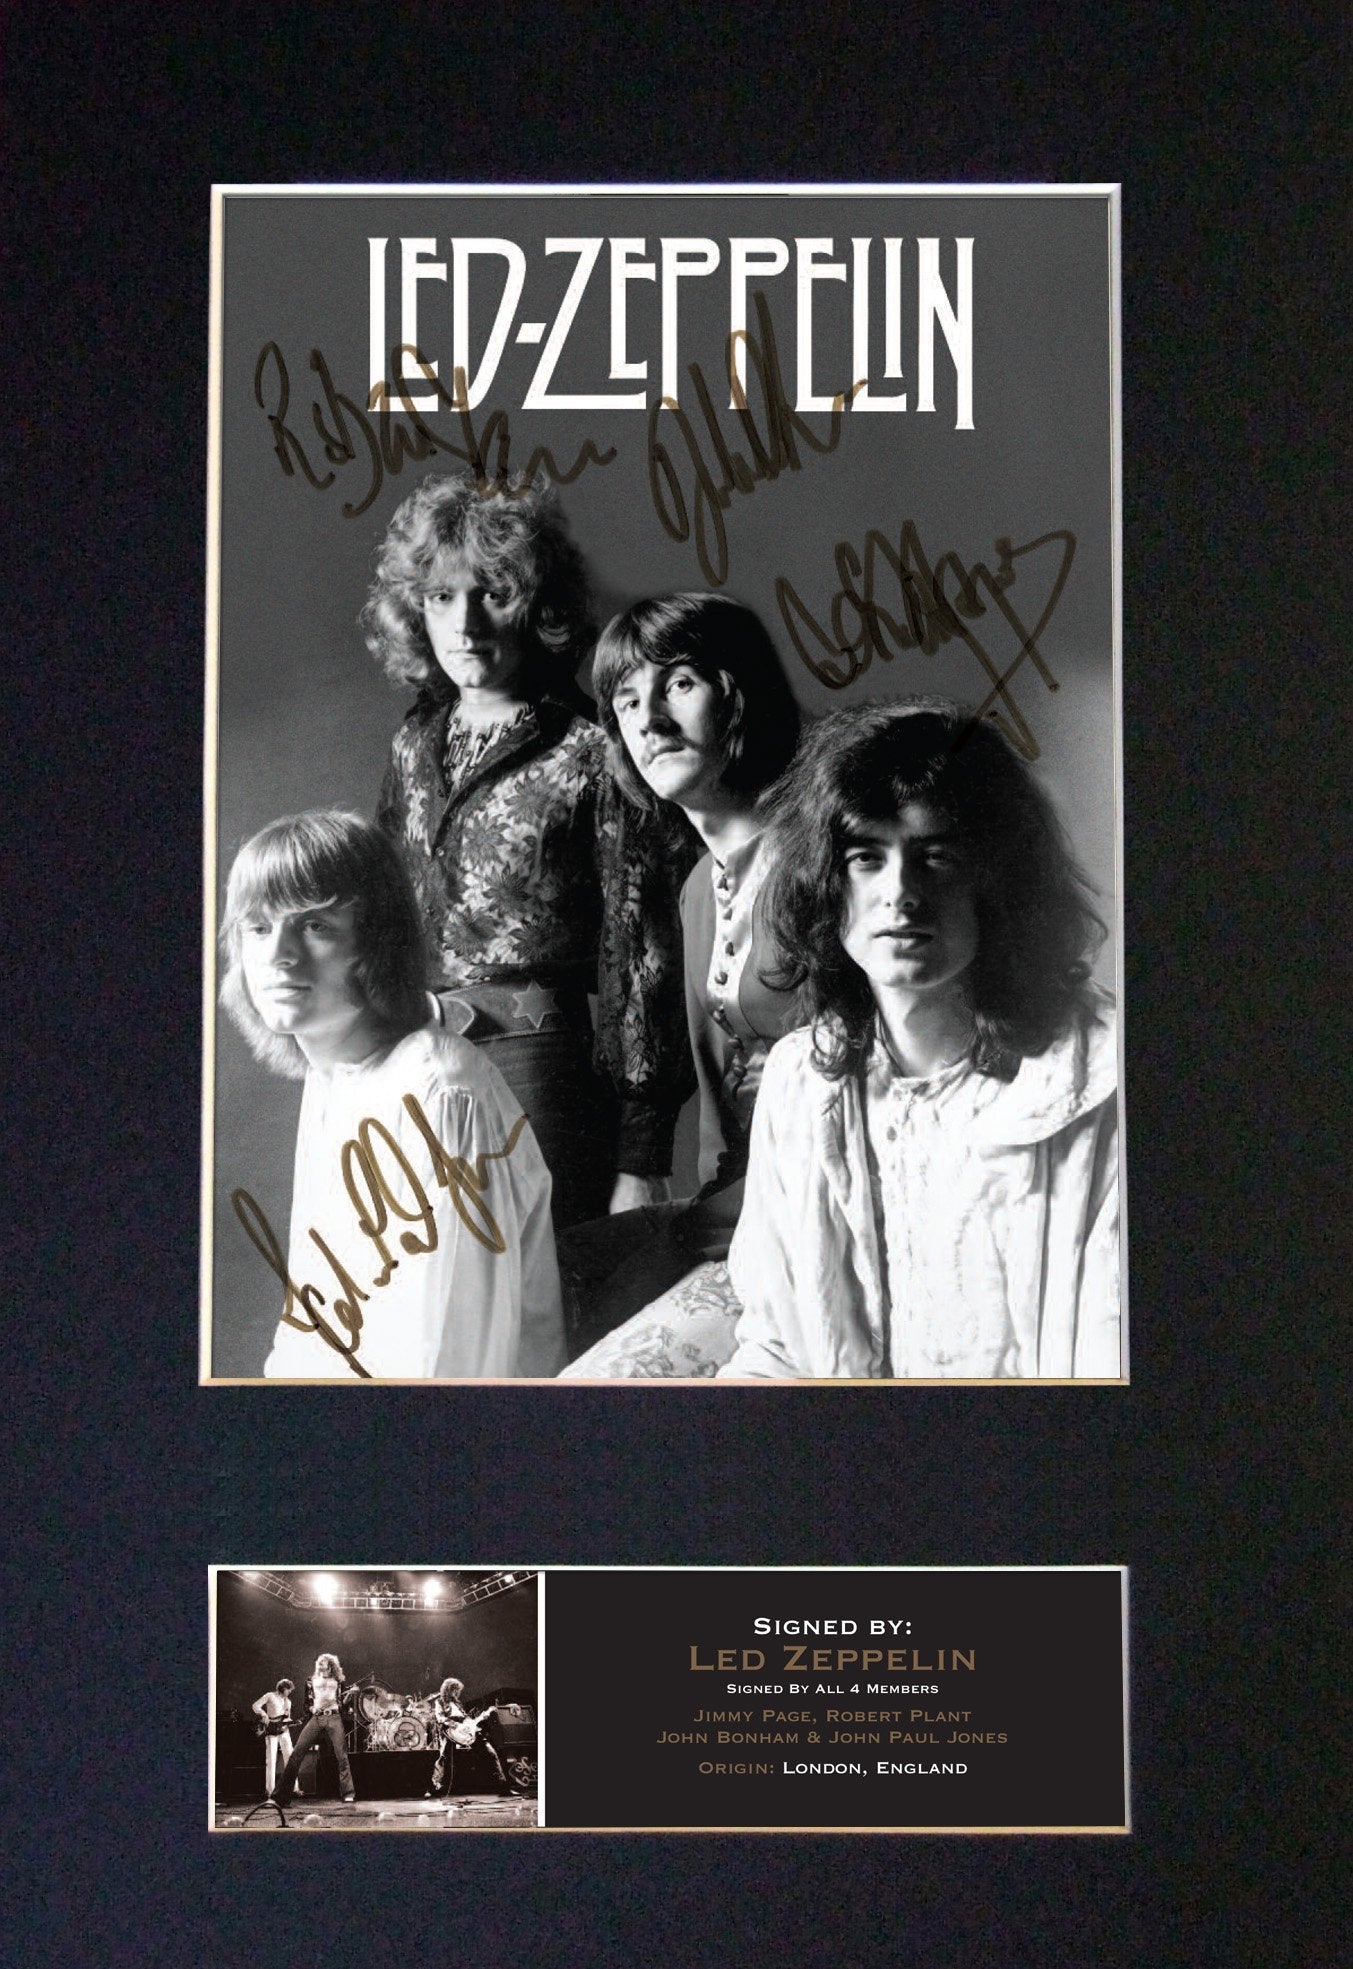 LED ZEPPELIN #2 RARE Signed Autograph Mounted Photo Repro A4 Print 512